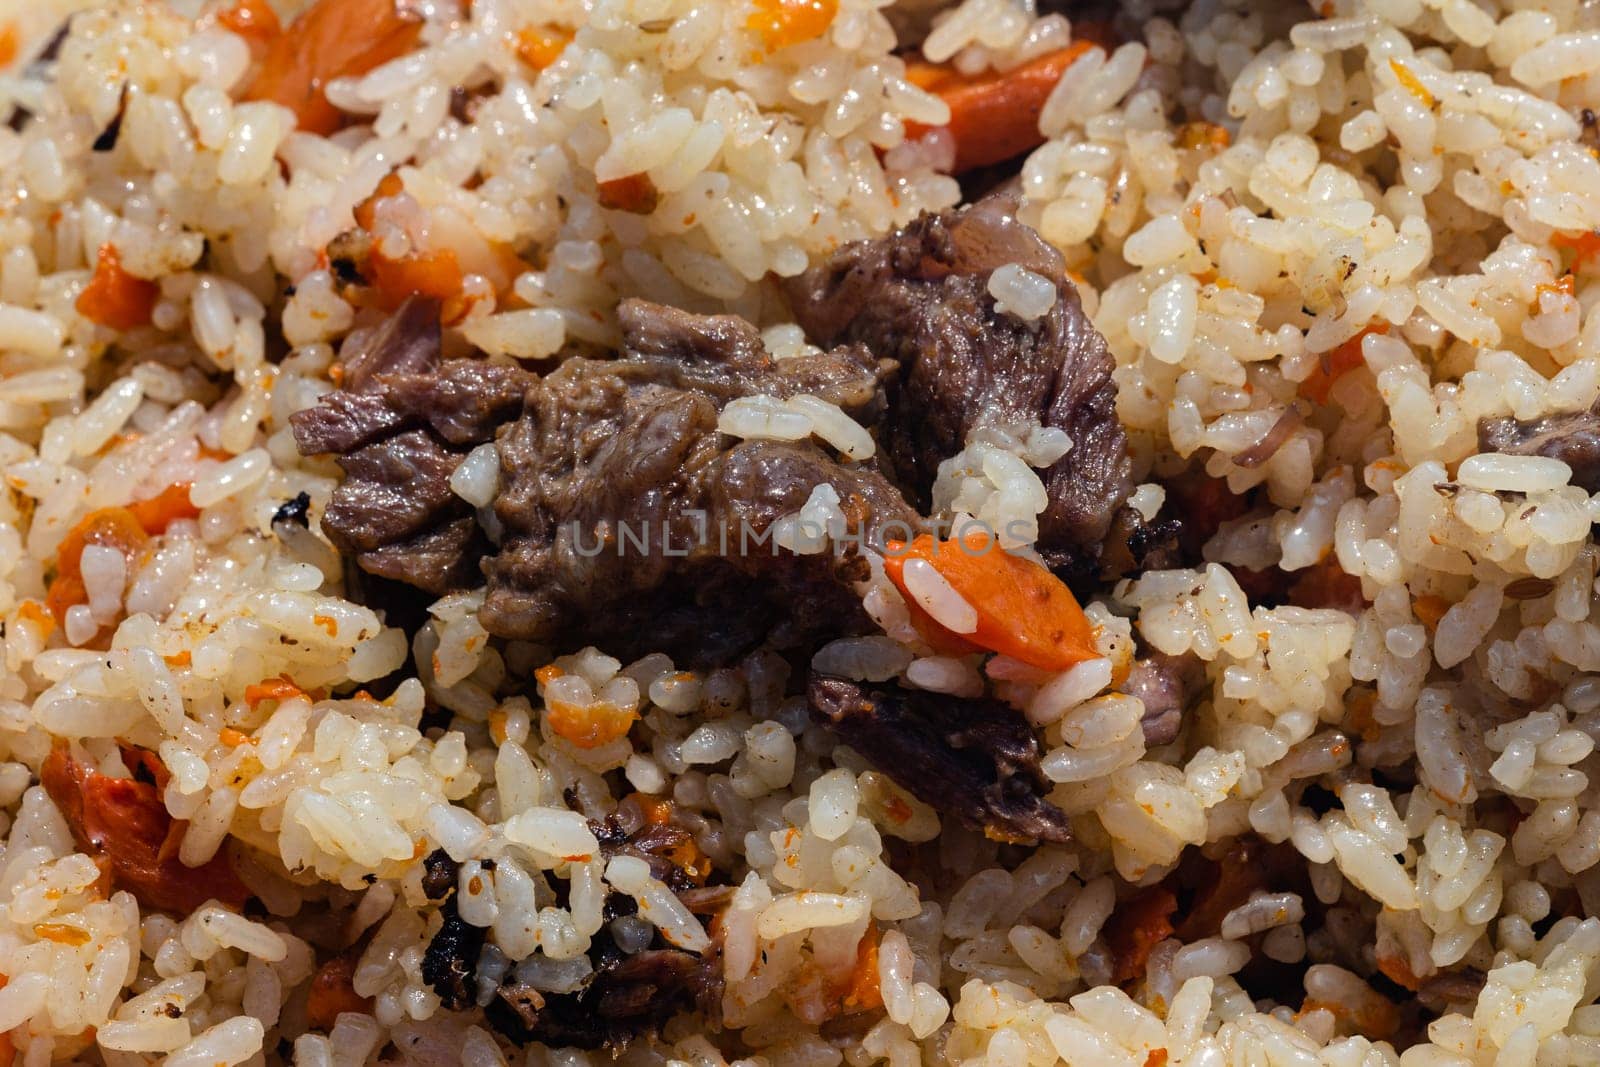 Traditional Eastern culinary dish - pilaf. Ingredients: rice with slices of meat by Alexander-Piragis